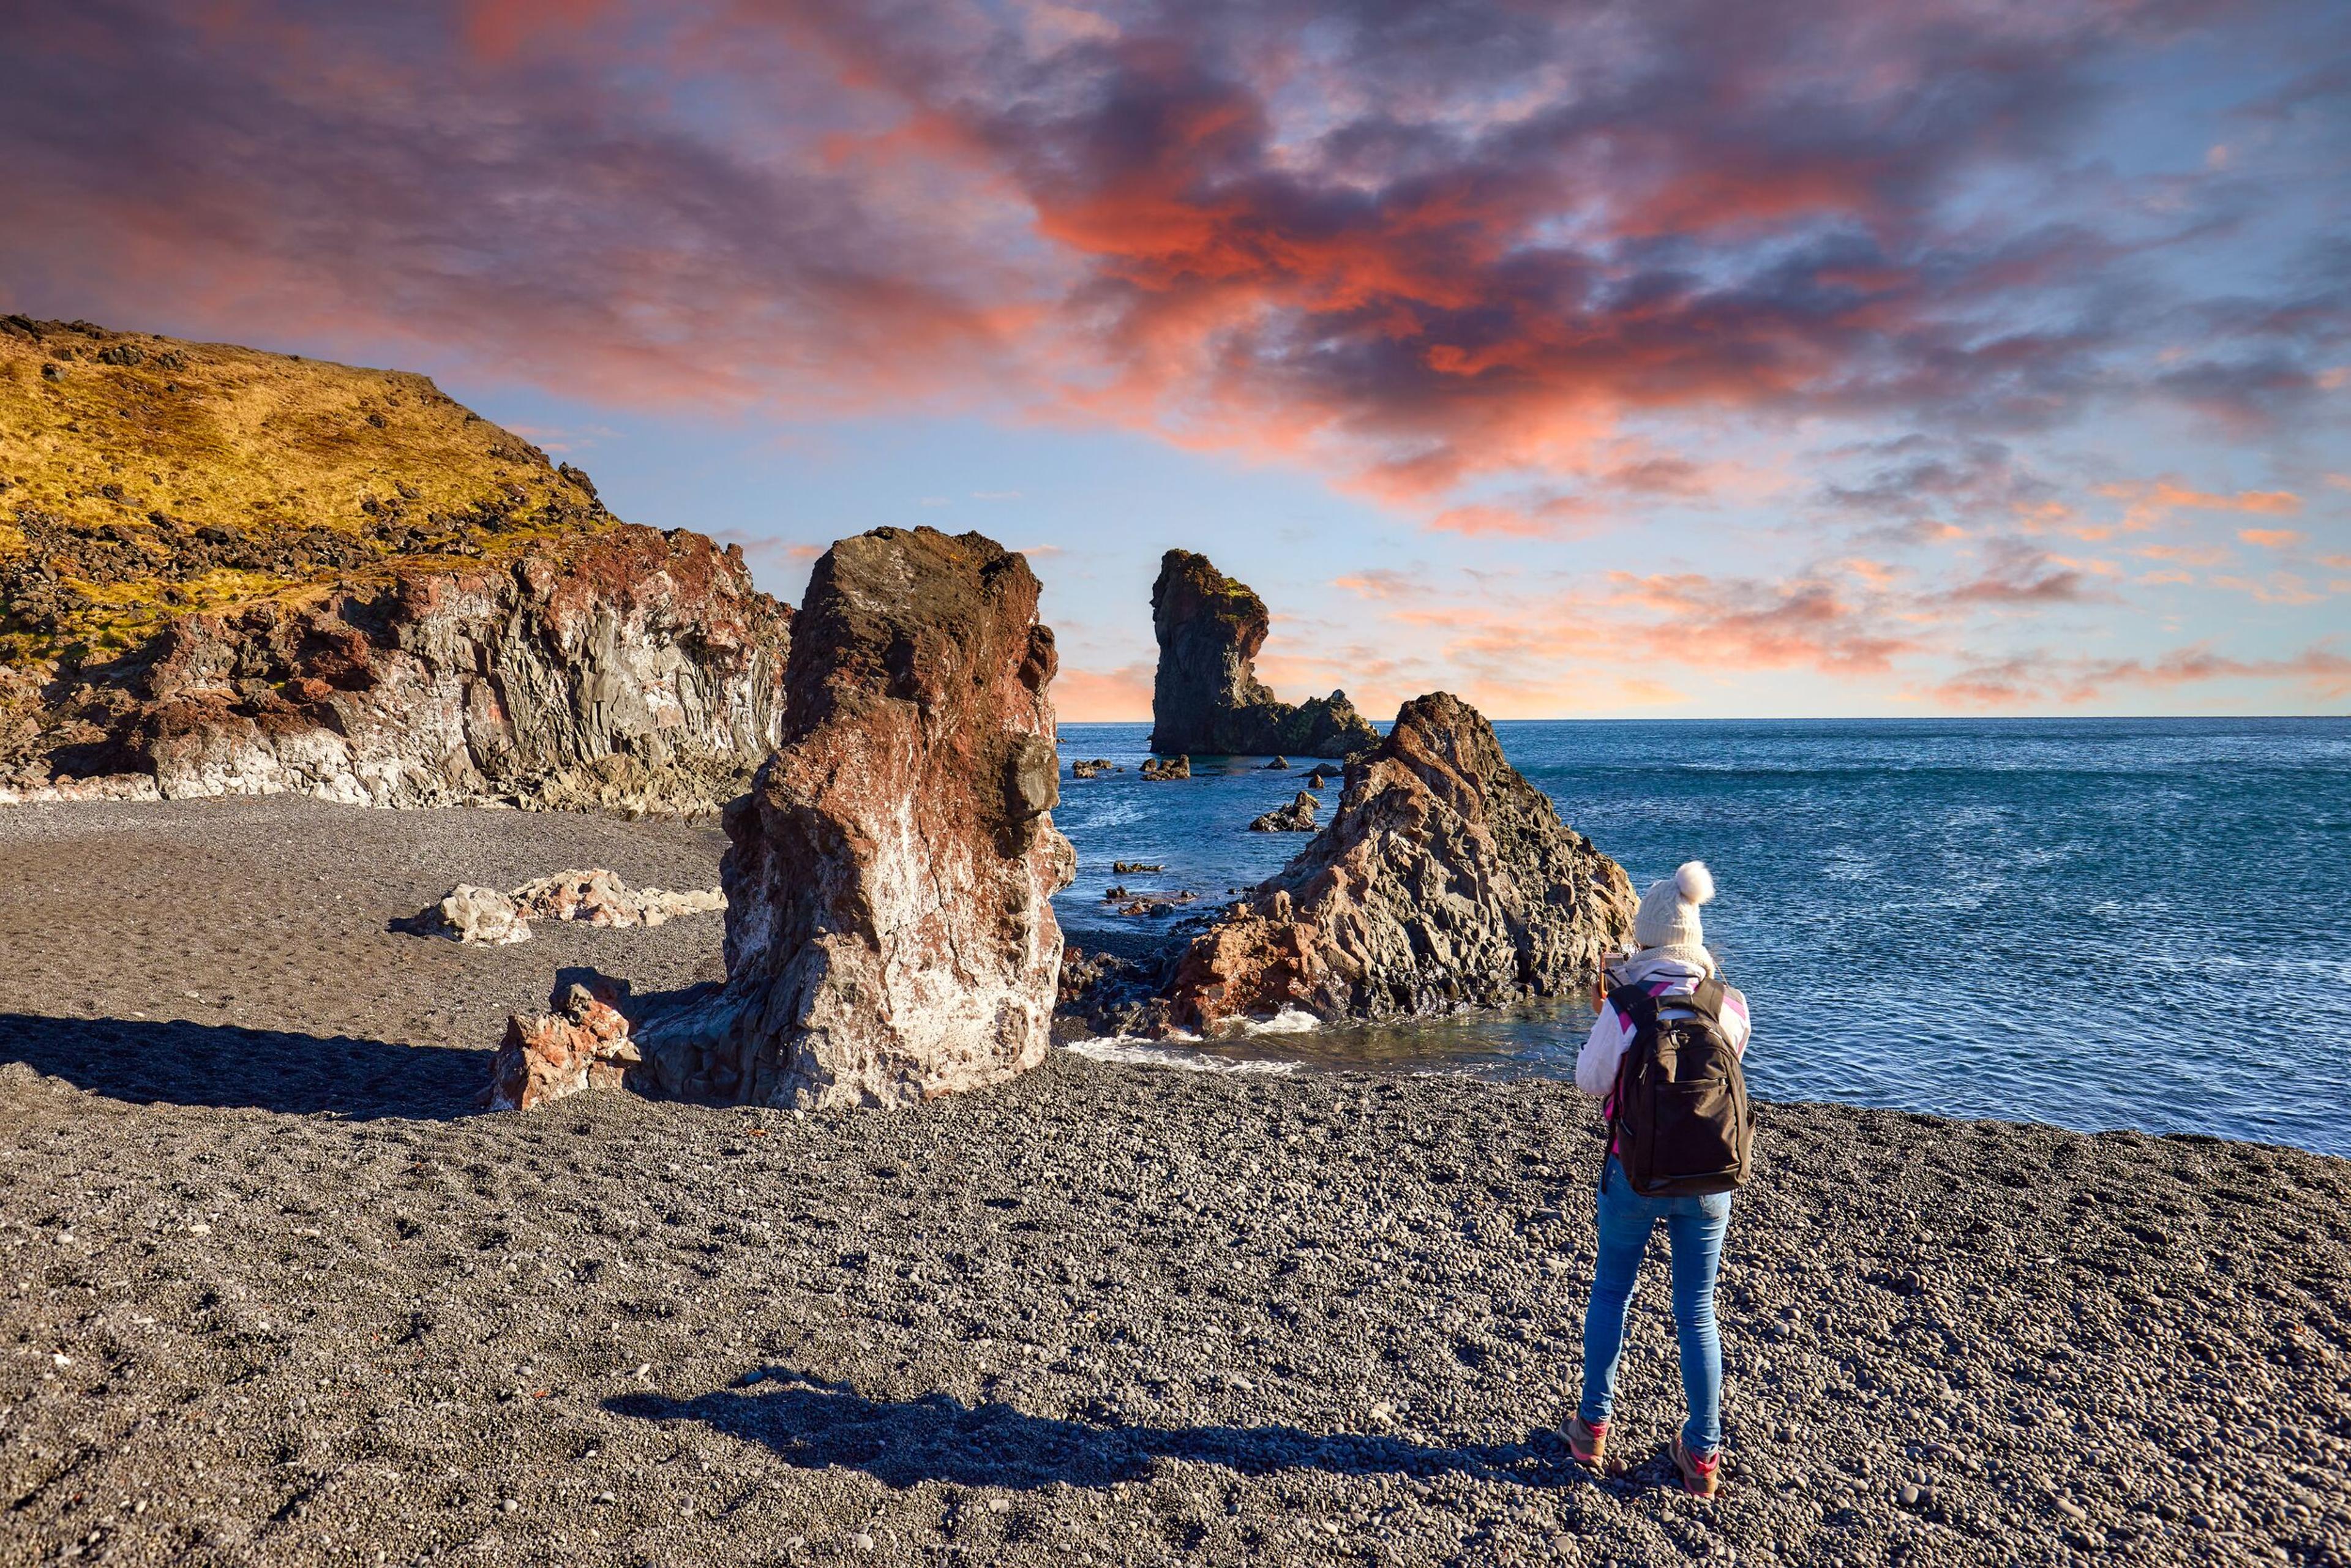 A person observes the dramatic volcanic rock formations along a black pebble beach under a fiery sunset sky, highlighting the rugged coastal beauty.